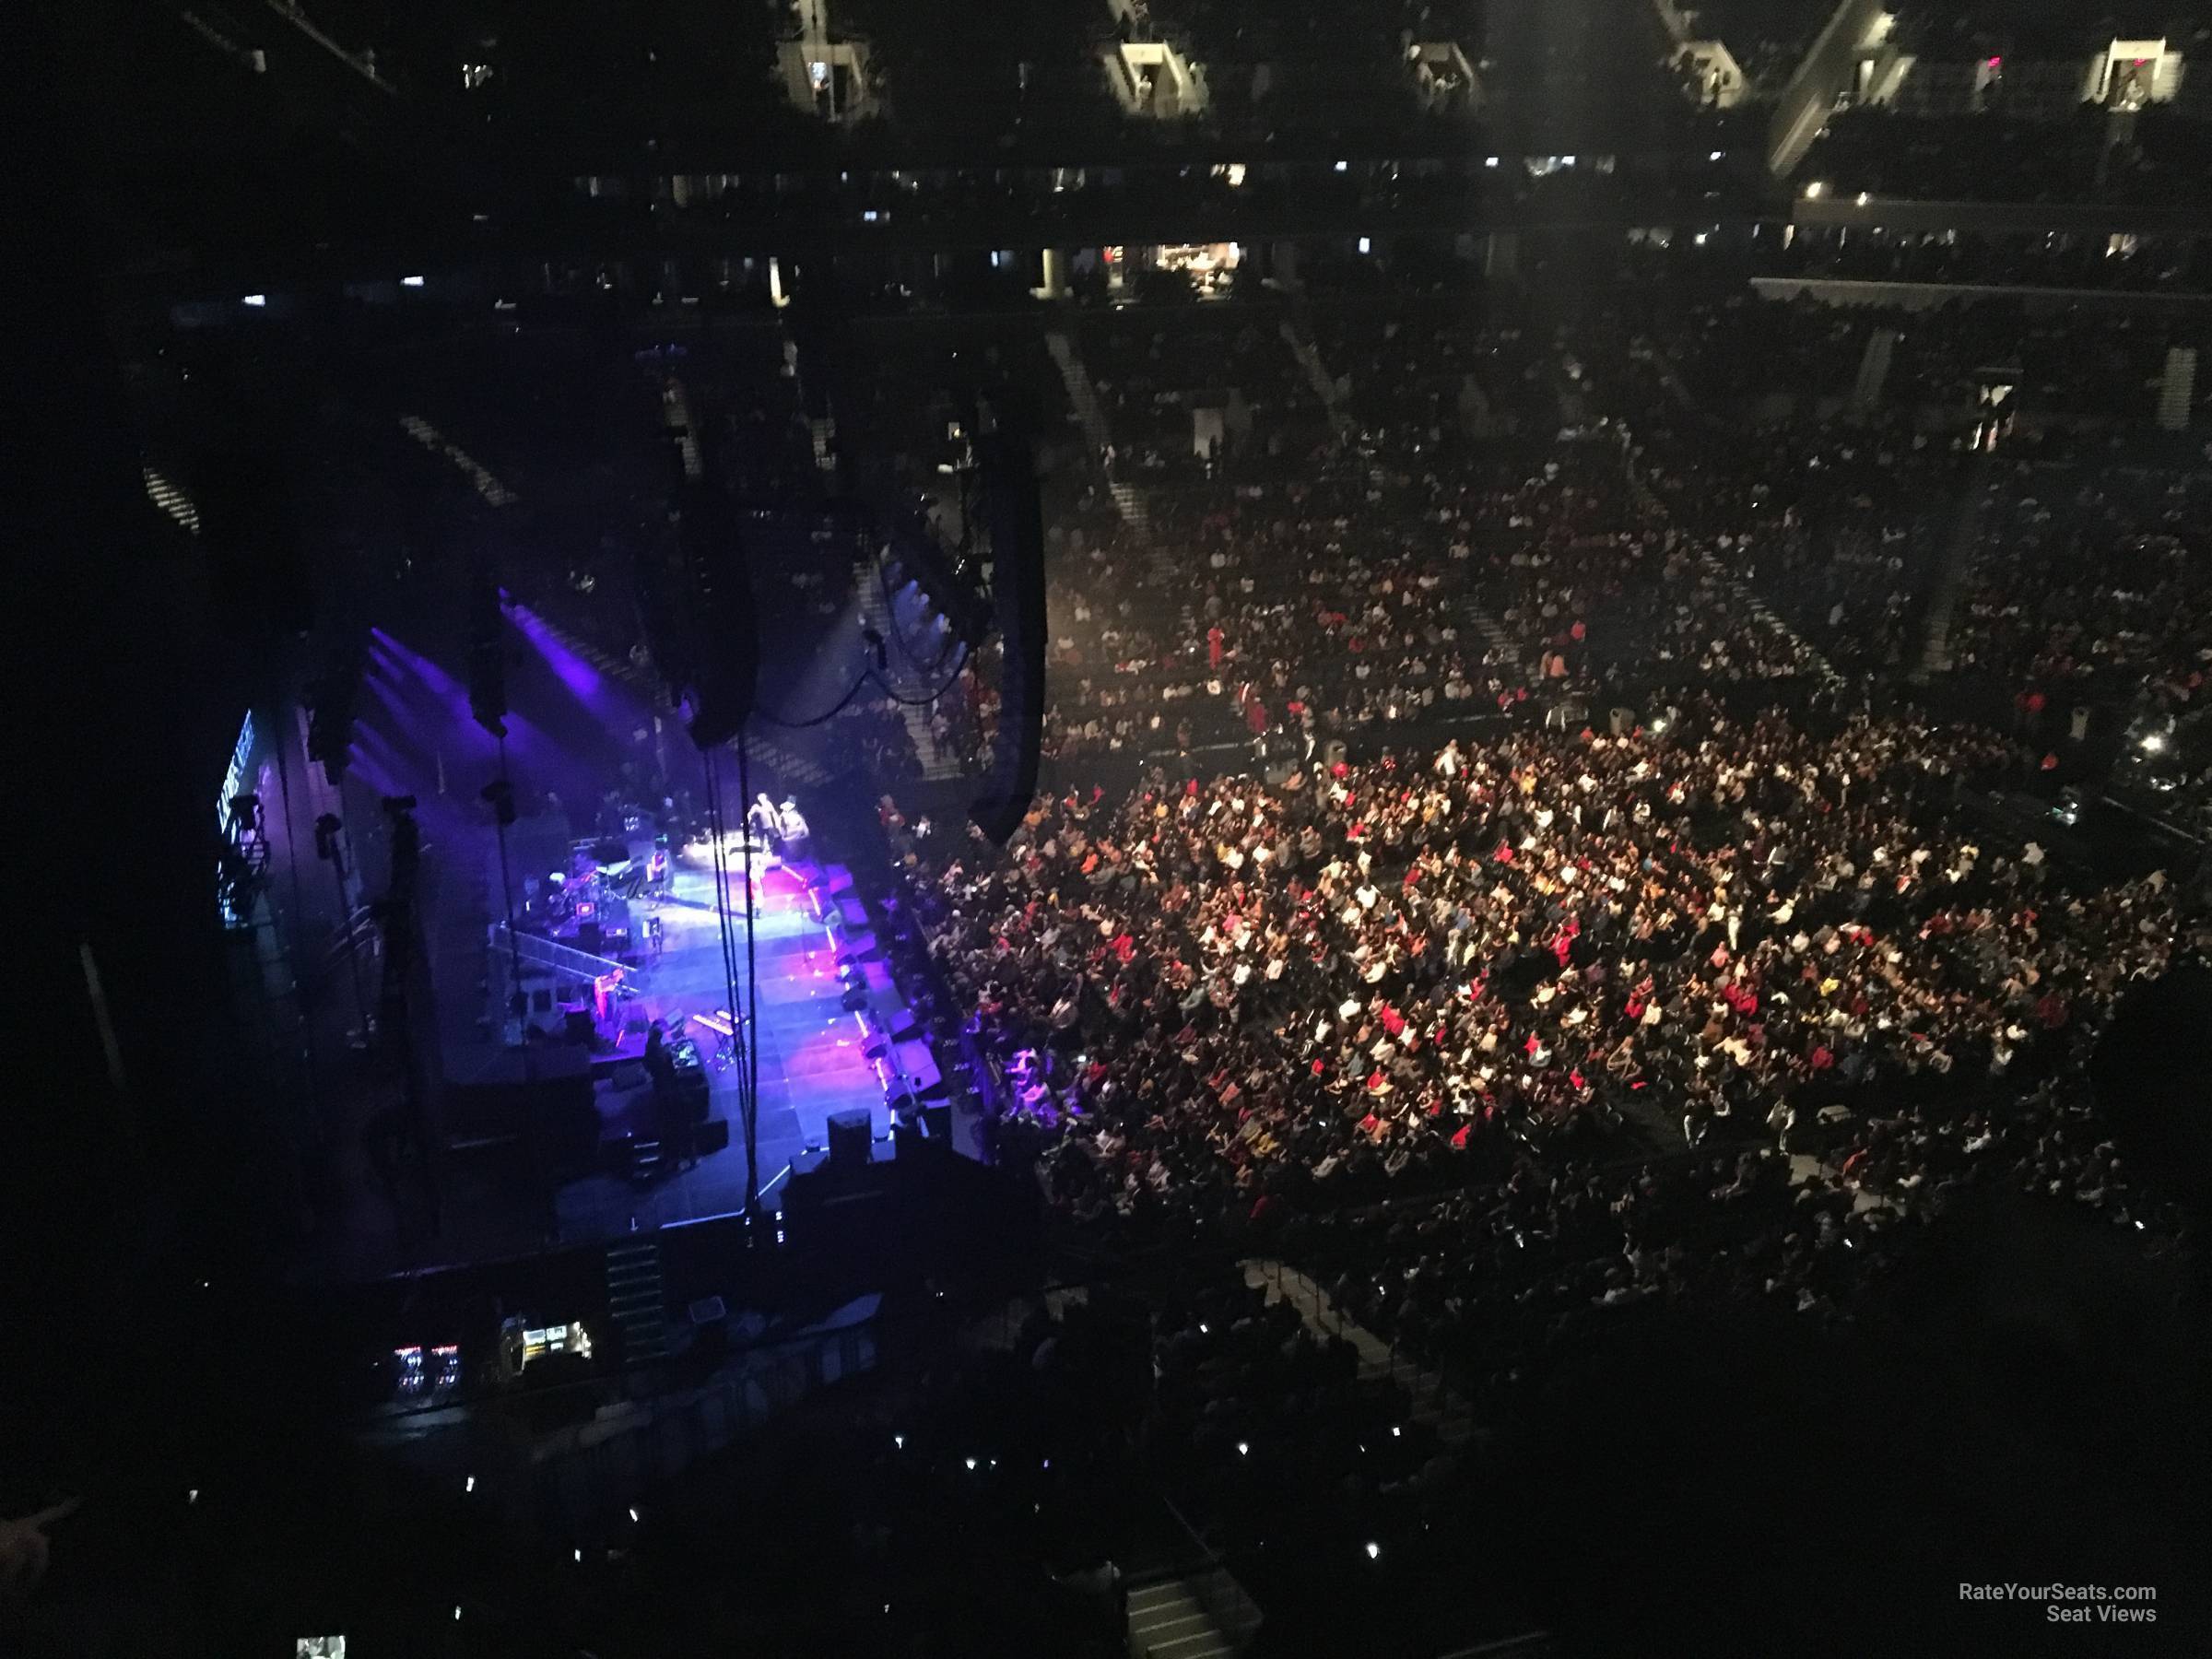 section 227, row 4 seat view  for concert - barclays center